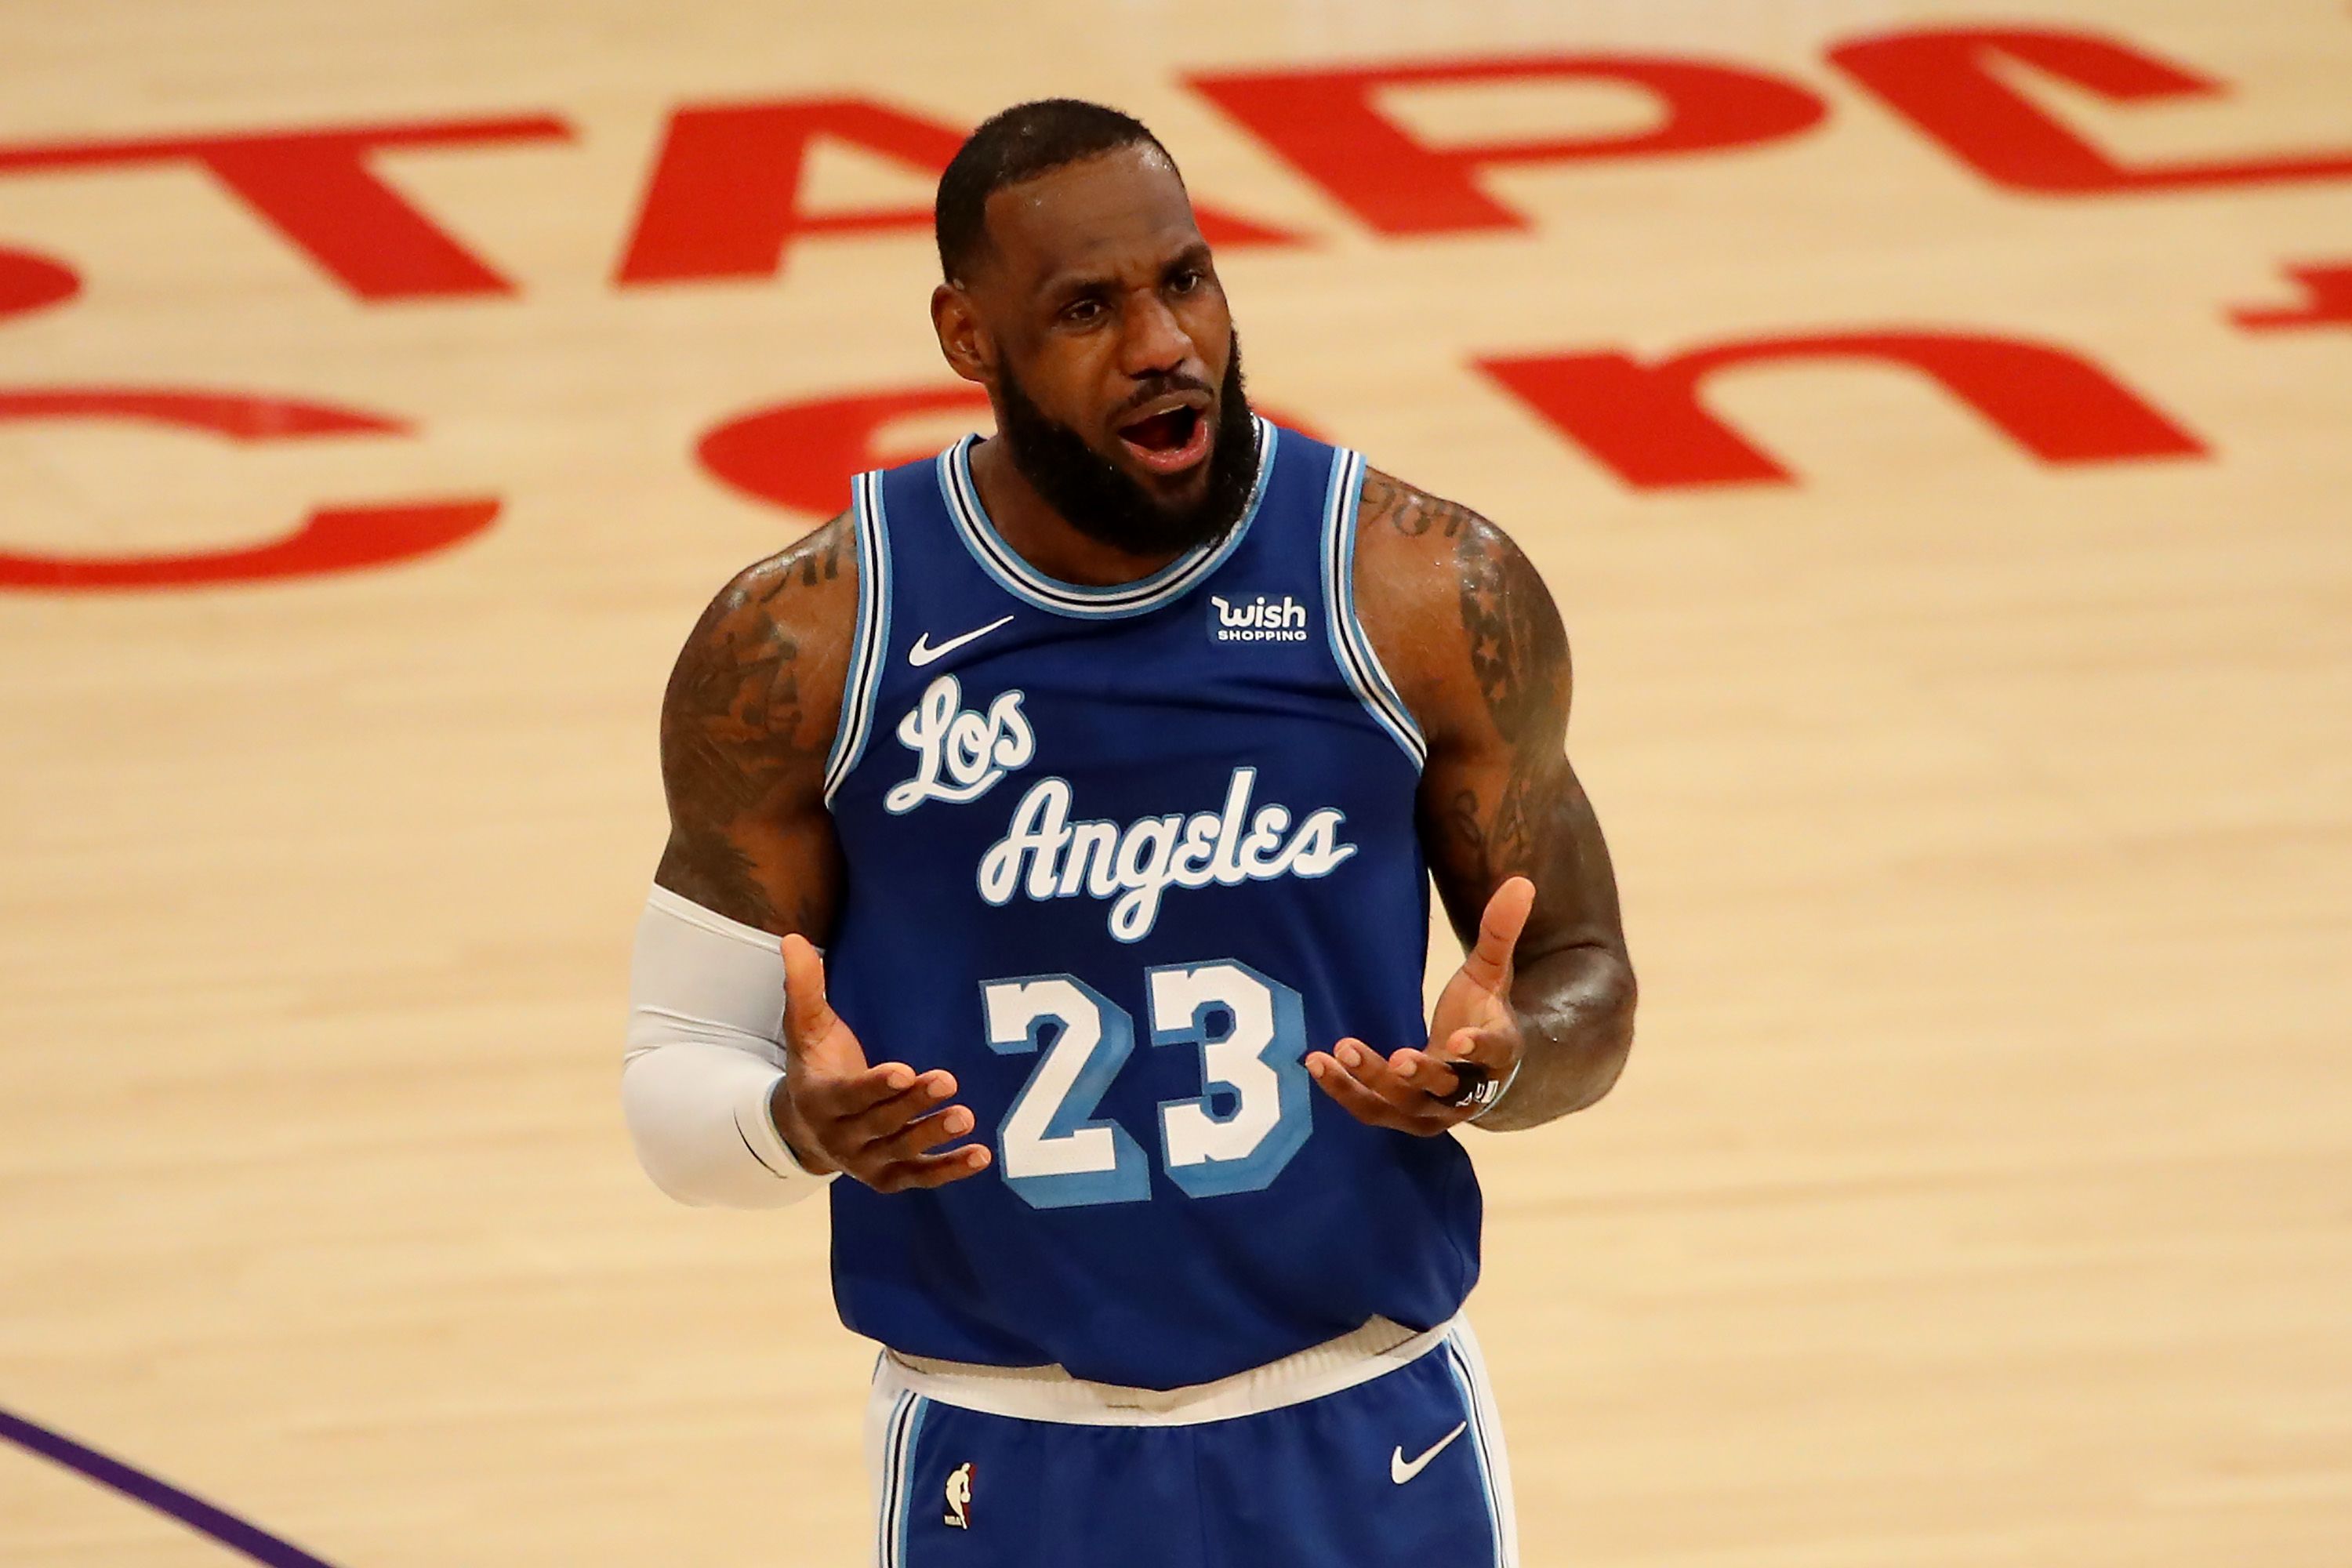 LeBron James ejected for 'unnecessary, excessive' contact on